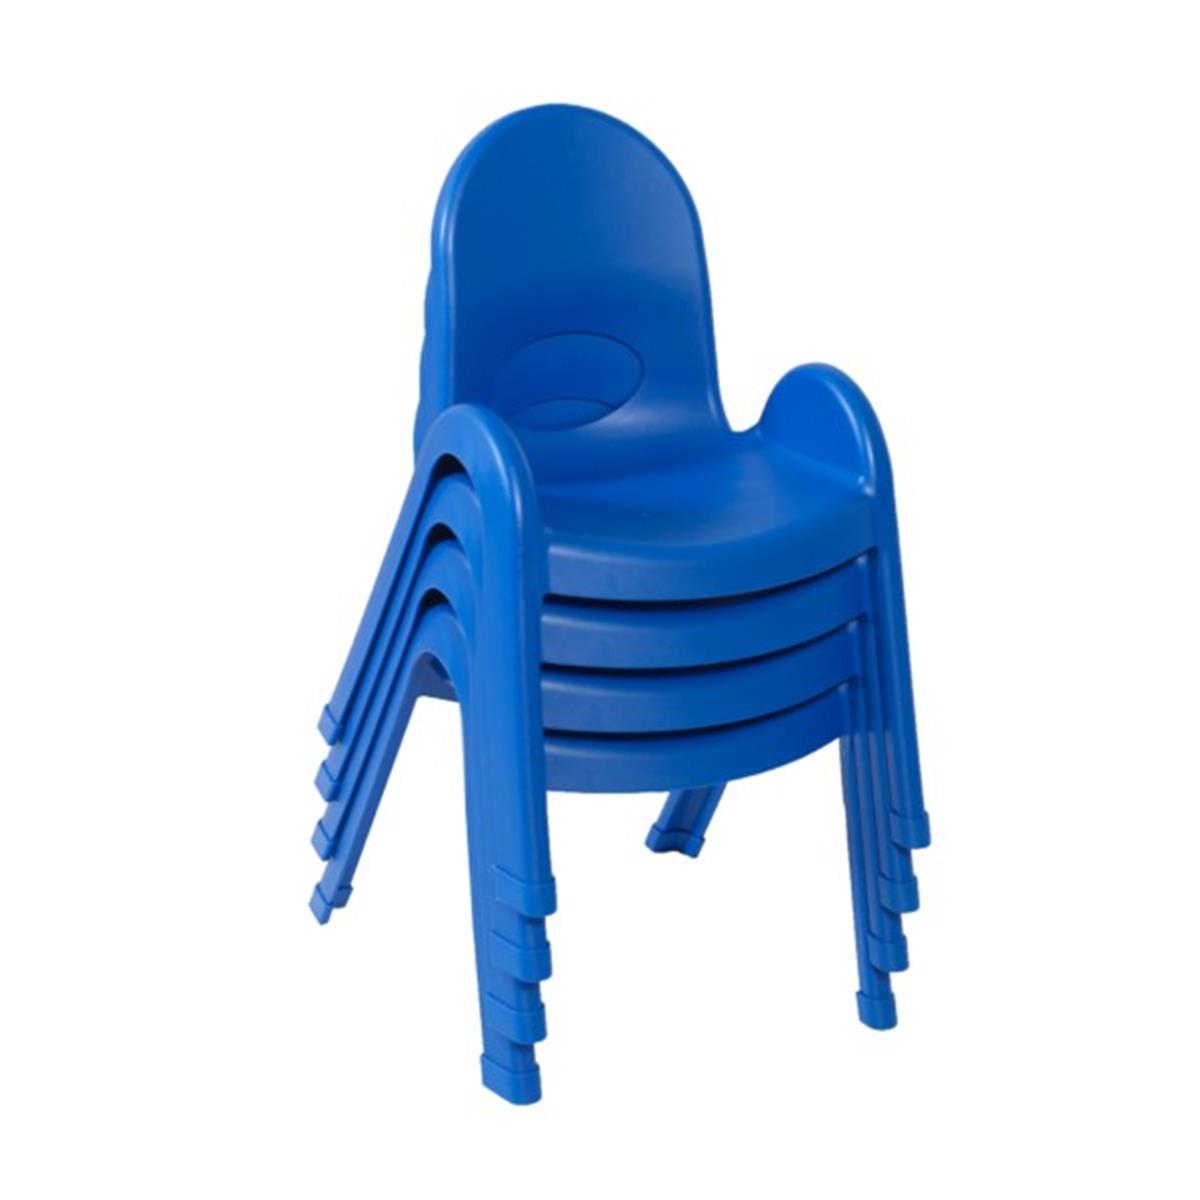 Ab7711pb4 11 In. Value Stack Child Chair, Royal Blue - Pack Of 4